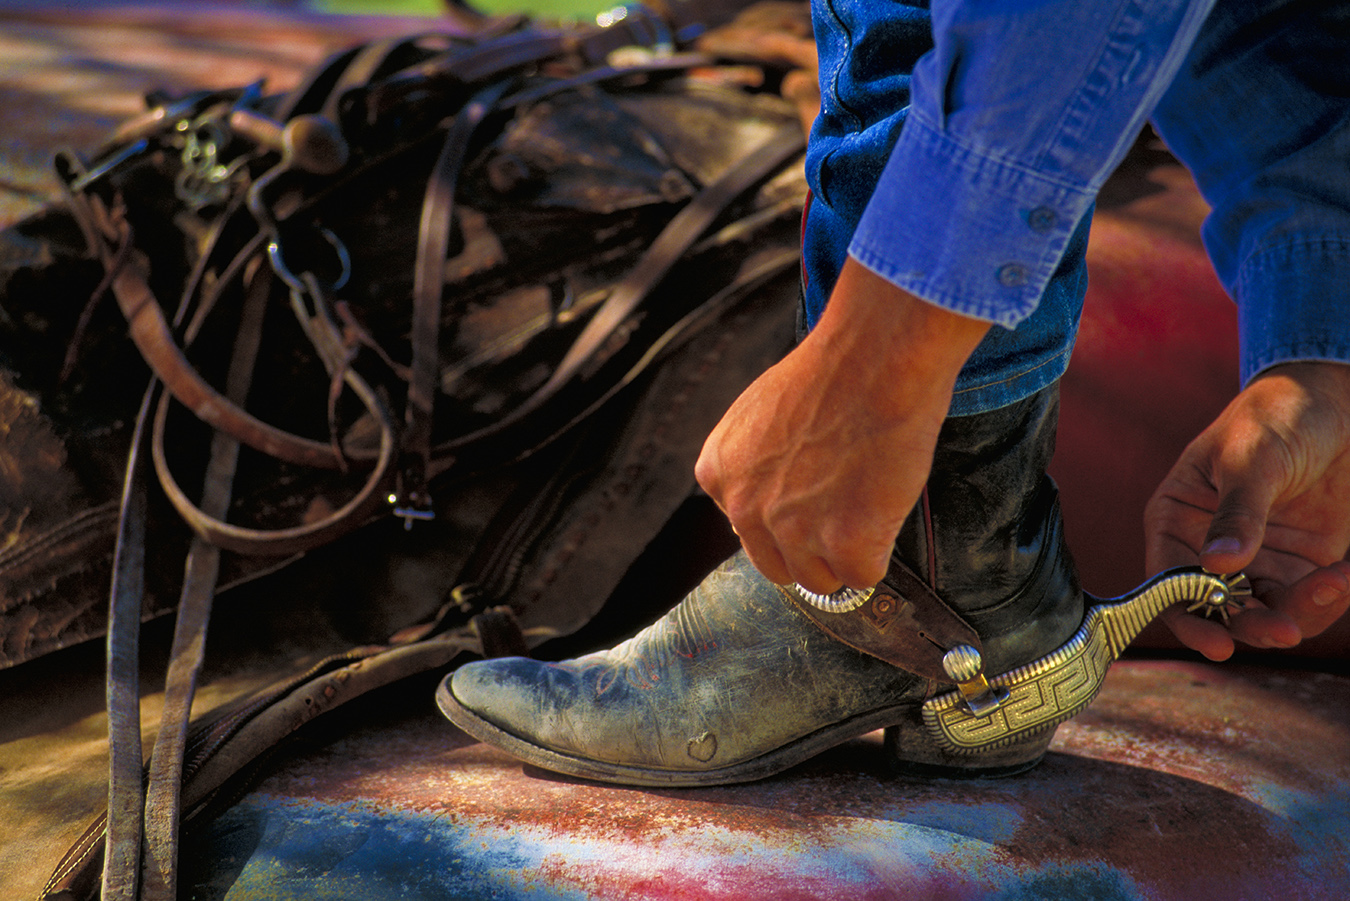 Jack_Ward_Photography_Boot_And_spur_Marlboro_Campaign_The_American_West